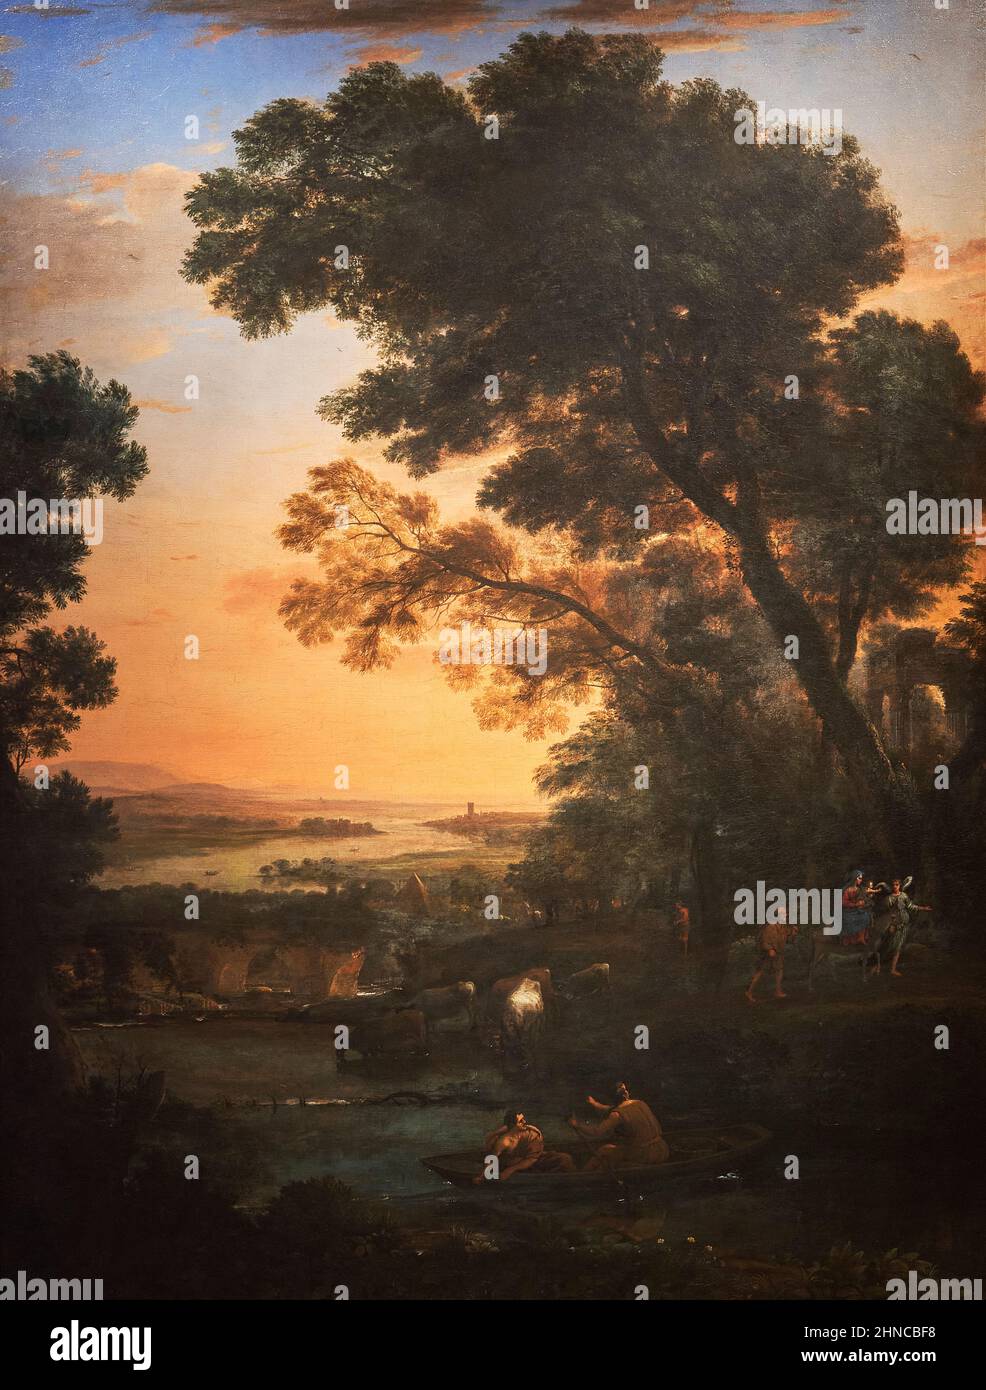 Claude Lorraine (c. 1600-1682). Pastoral Landscape with the Flight into Egypt. 1663. Oil on canvas. 193 x 147 cm.  Claude Lorraine was a French Baroqu Stock Photo